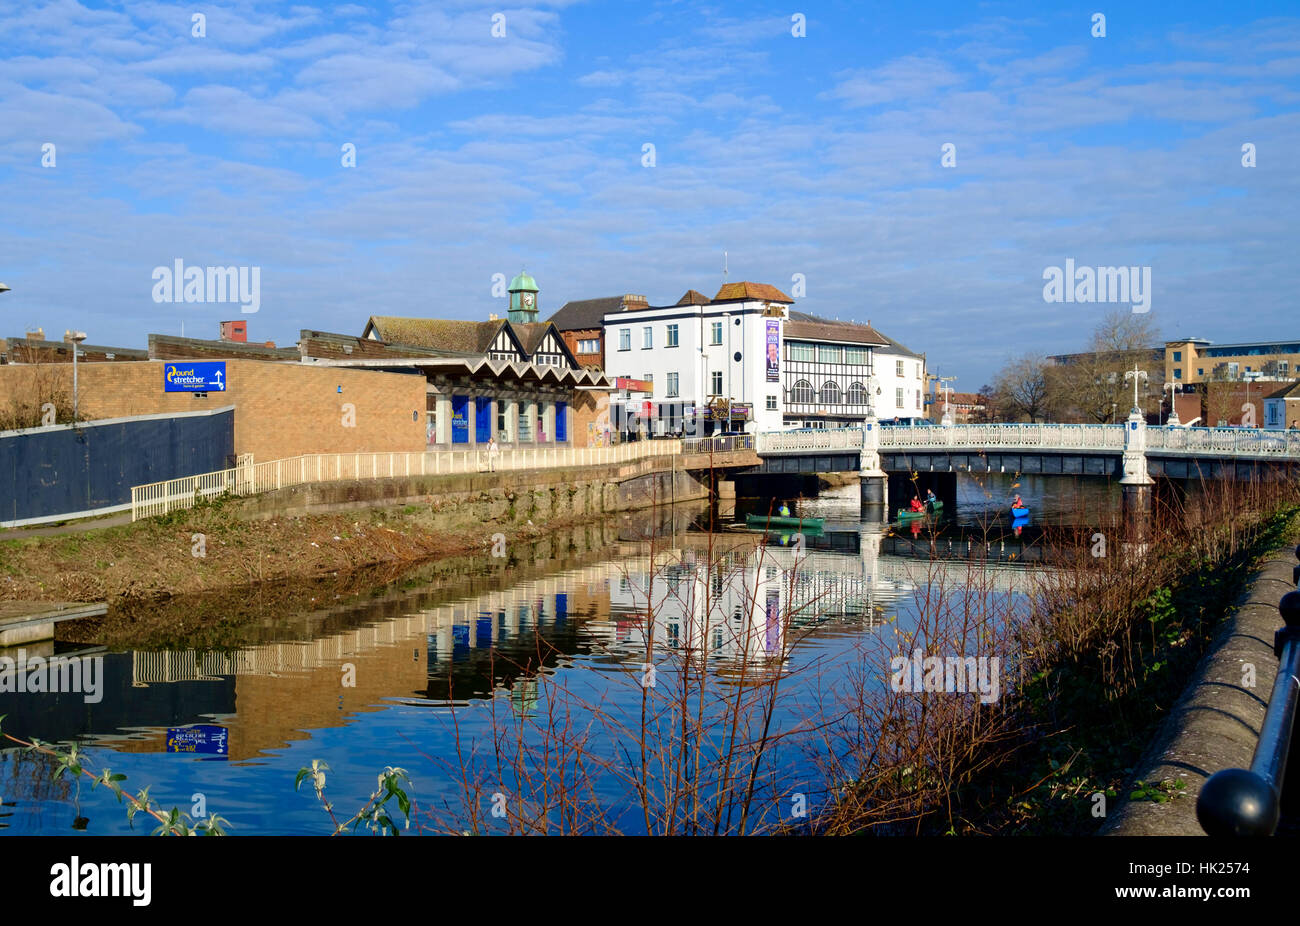 Taunton the county town of Somerset England Town Bridge and Rive Tone Stock Photo